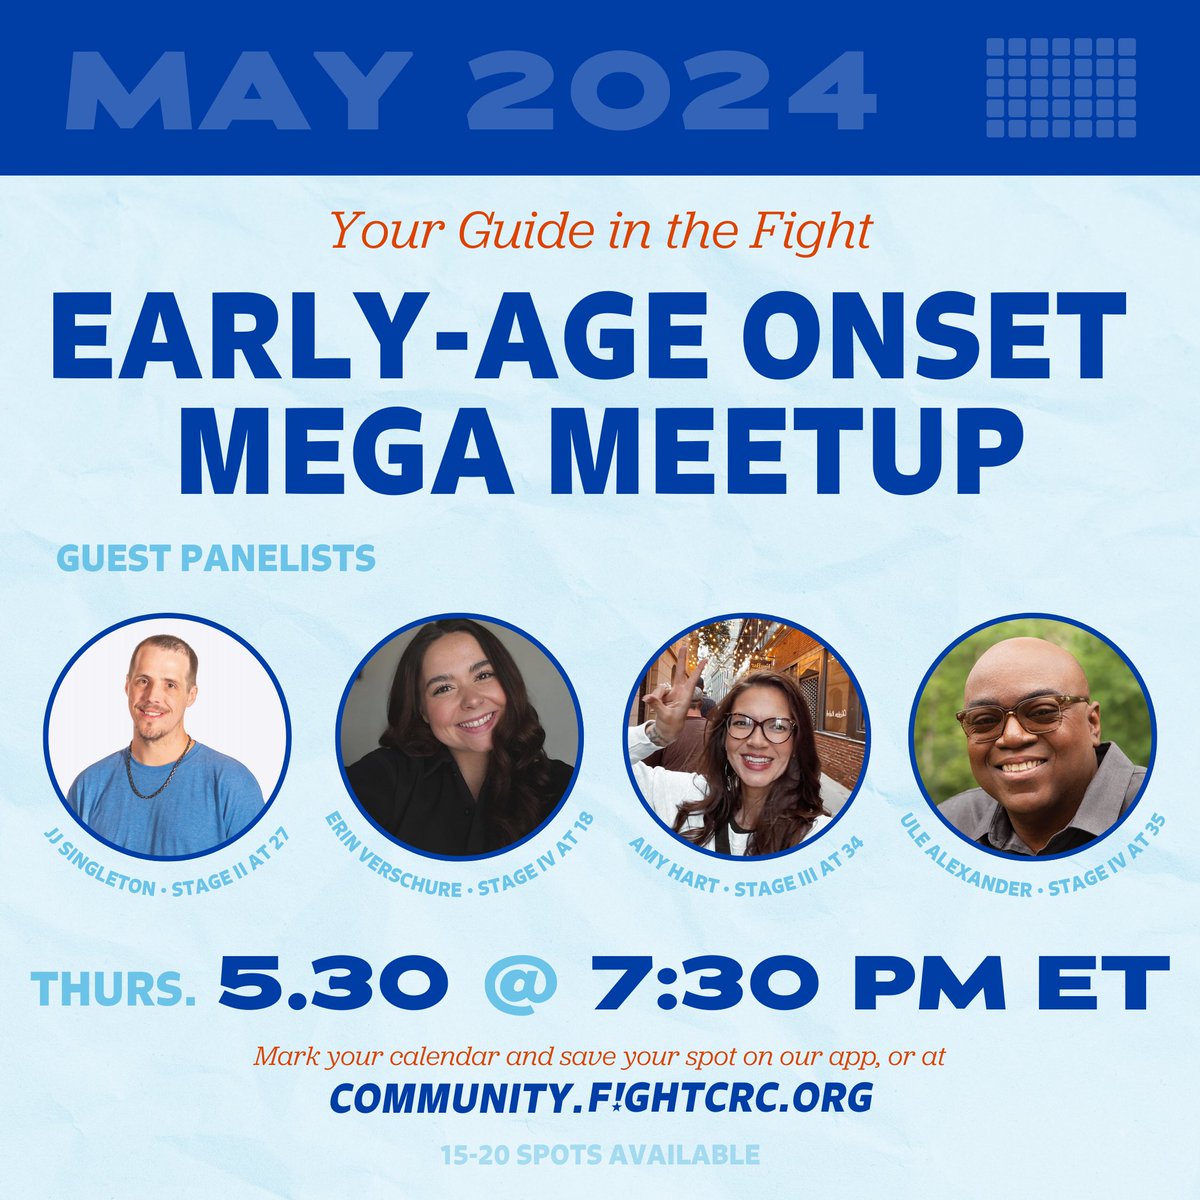 Next week May 30 at 7:30 pm et come join us if your a early age onset patient or caregiver. @fightcrc is putting on this amazing opportunity. I'm so blessed to be a panelist along side my best friend @barefootostomy we are going talk about friendships through cancer